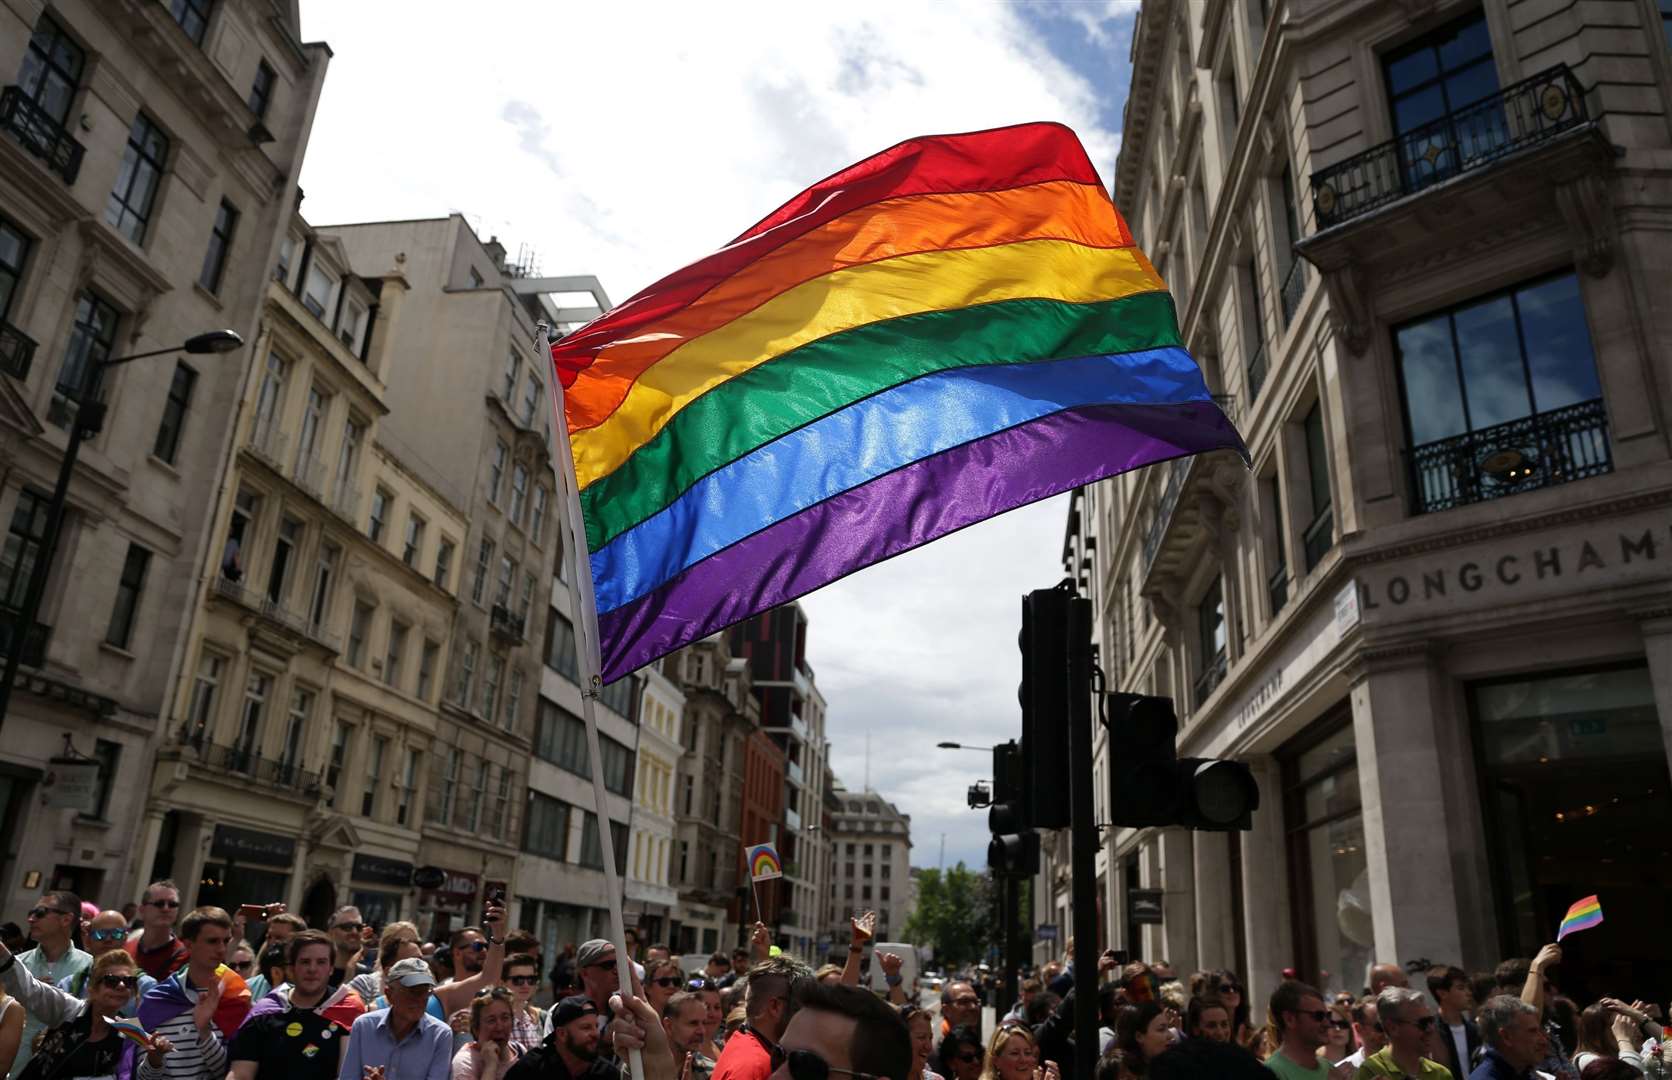 A rainbow flag is held aloft as a Pride in London parade makes its way through the streets. Picture: Daniel Leal-Olivas/PA Wire